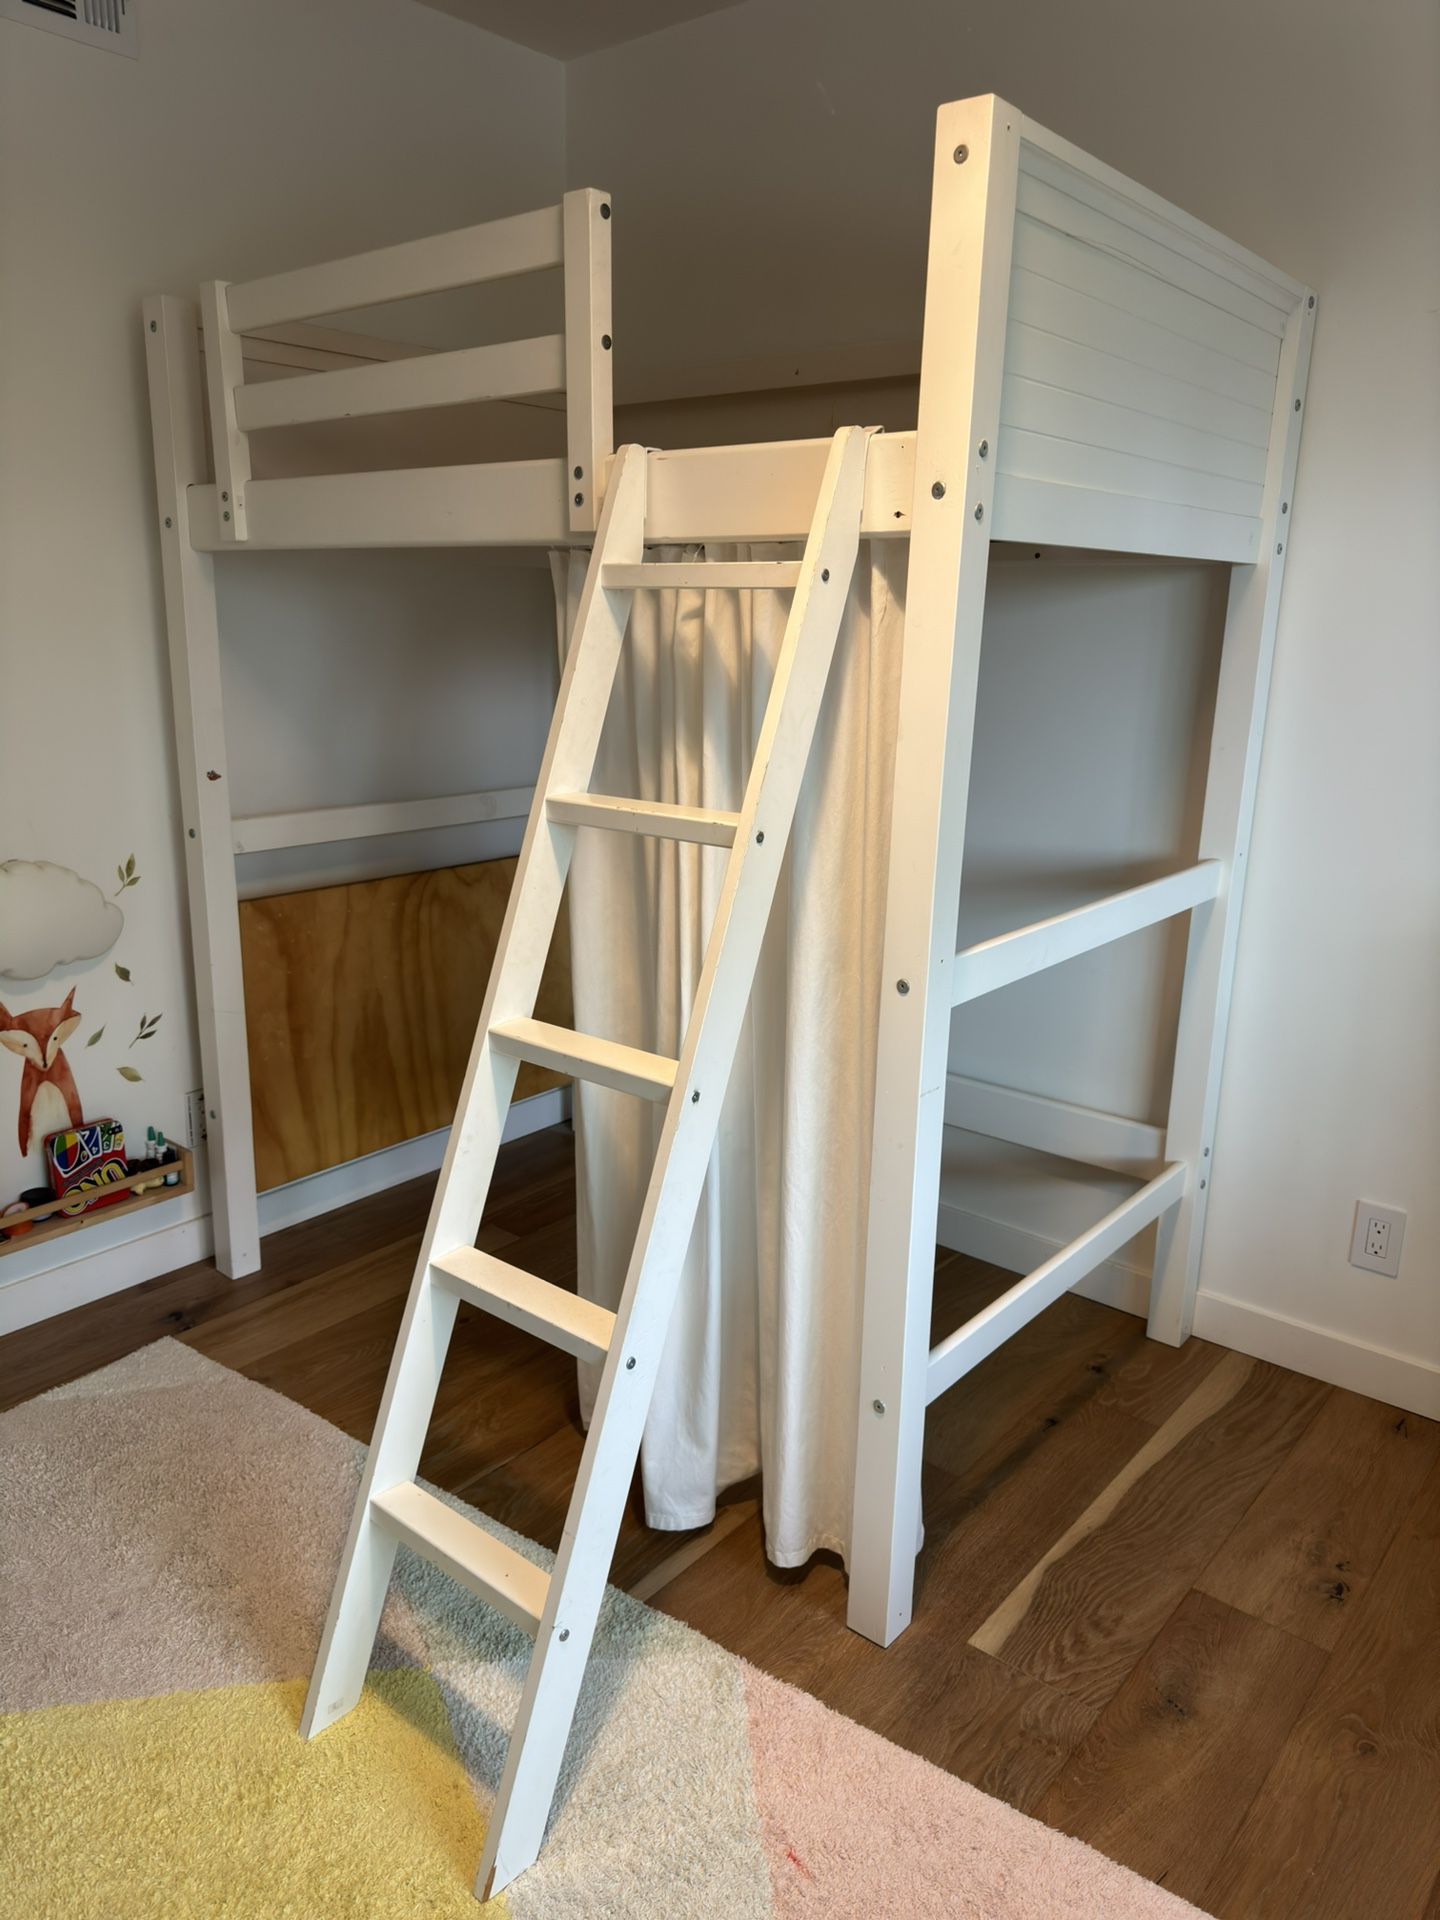 Kids Loft Bed High bed Nursery Bunk Bed white and birch wood with Ladder